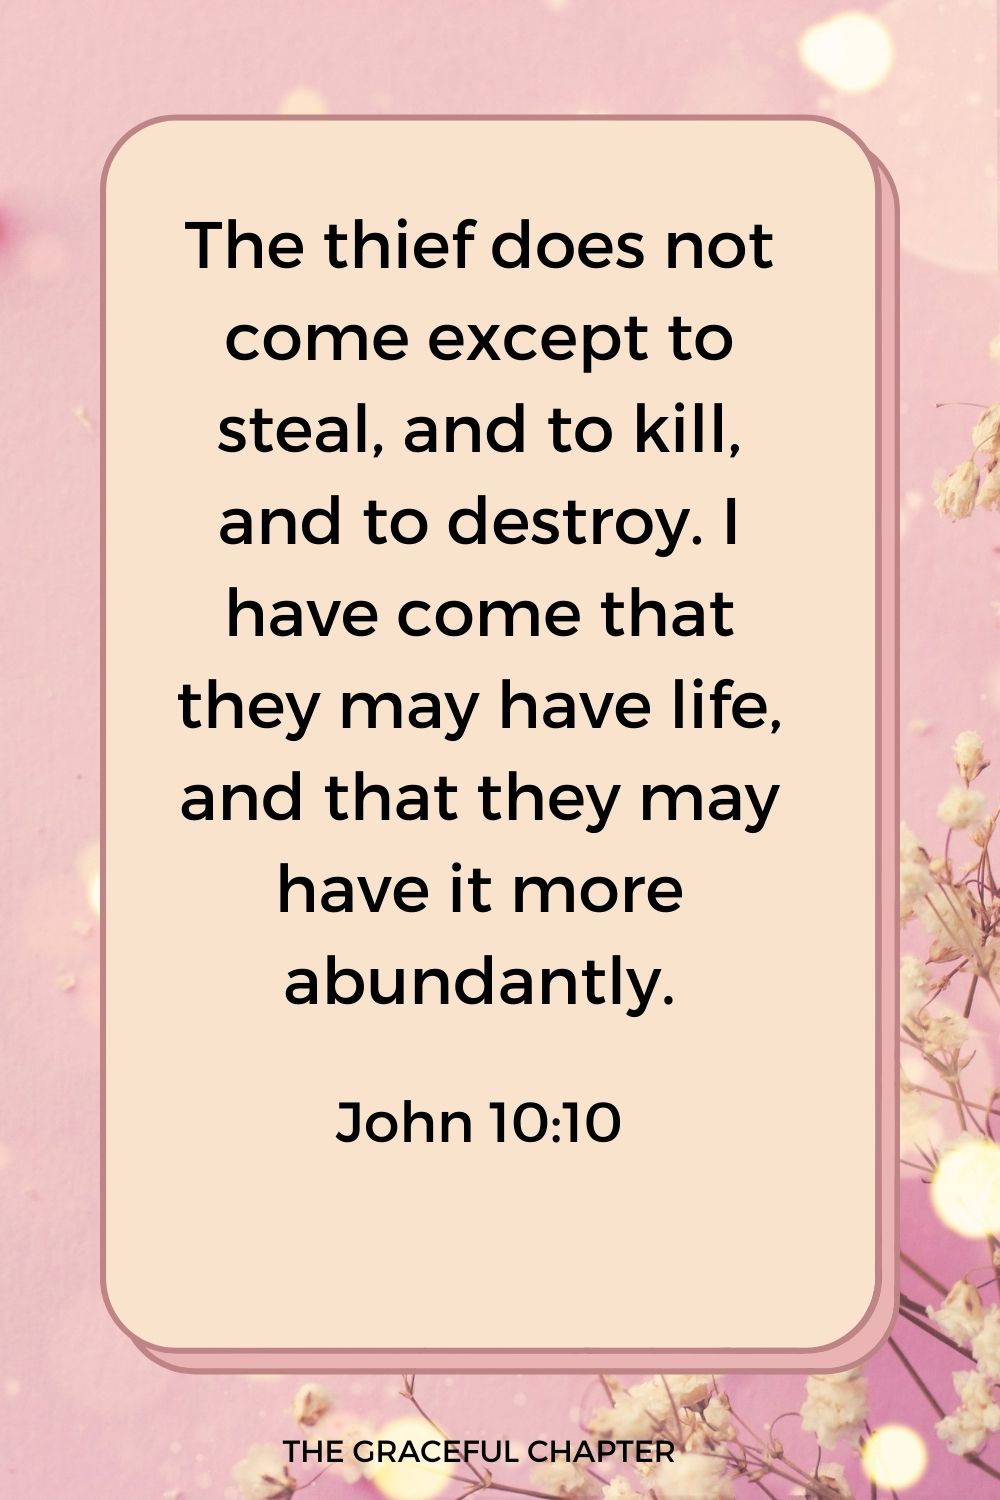 The thief does not come except to steal, and to kill, and to destroy. I have come that they may have life, and that they may have it more abundantly. John 10:10